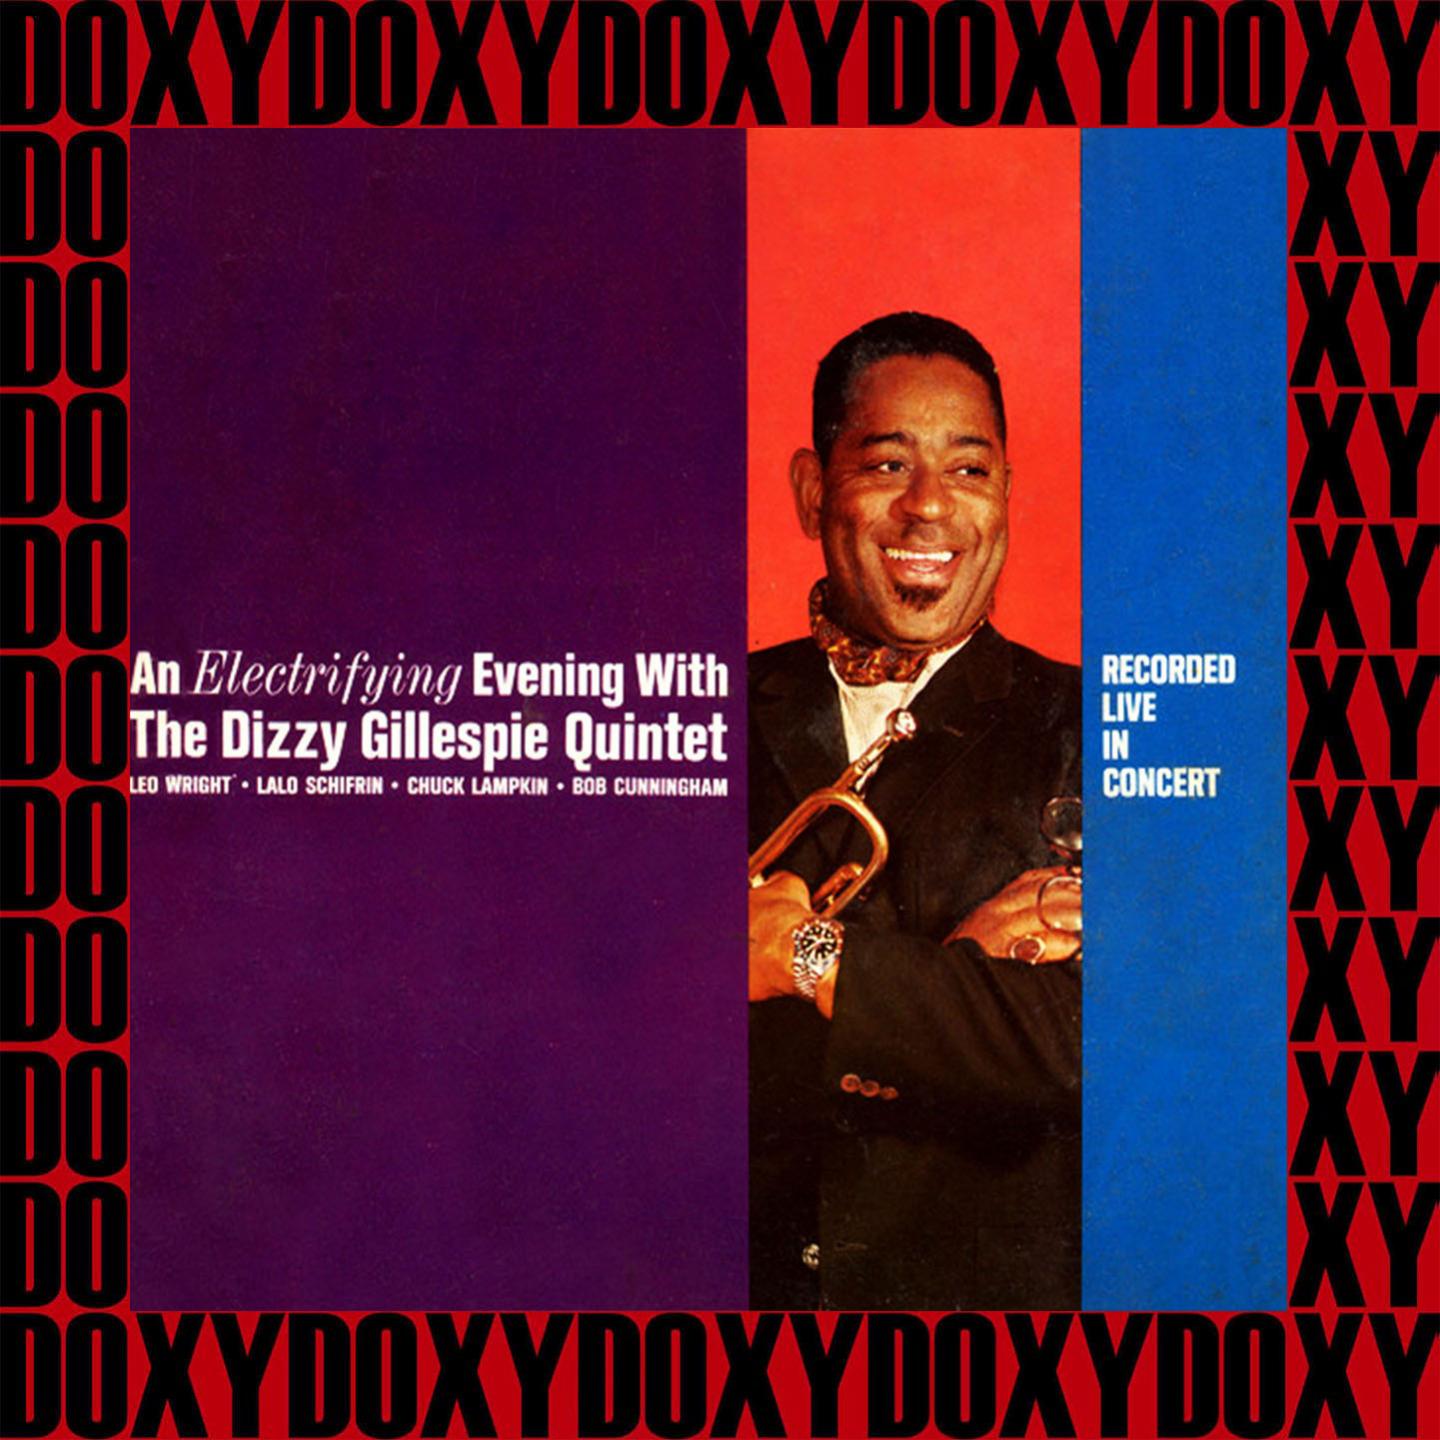 An Electrifying Evening With The Dizzy Gillespie Quintet (Expanded, Remastered Version) (Doxy Collection)